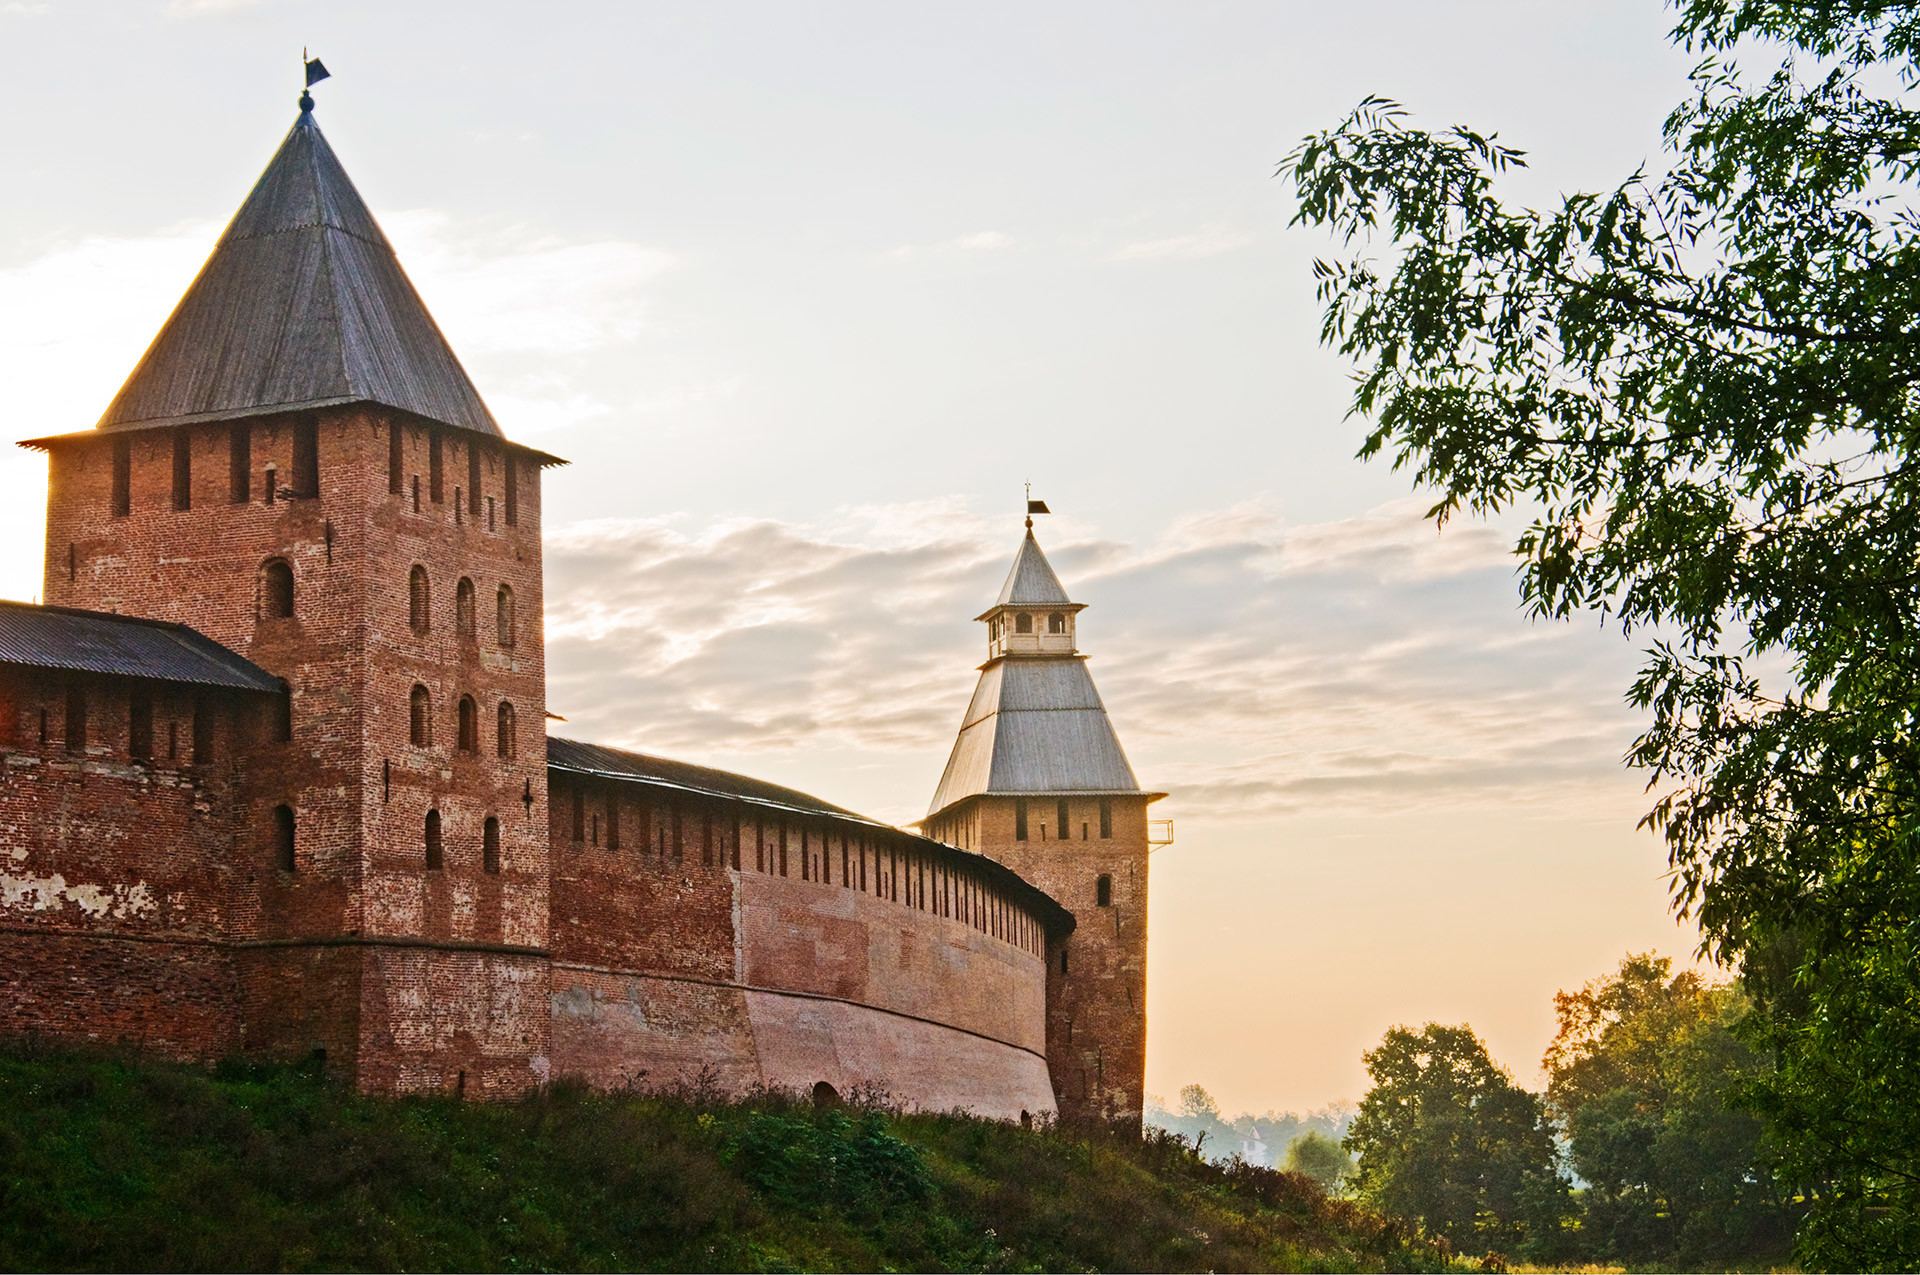 Walls and tower of the Kremlin, which was rebuilt with bricks during the 14th century. Veliky Novgorod, Russia.